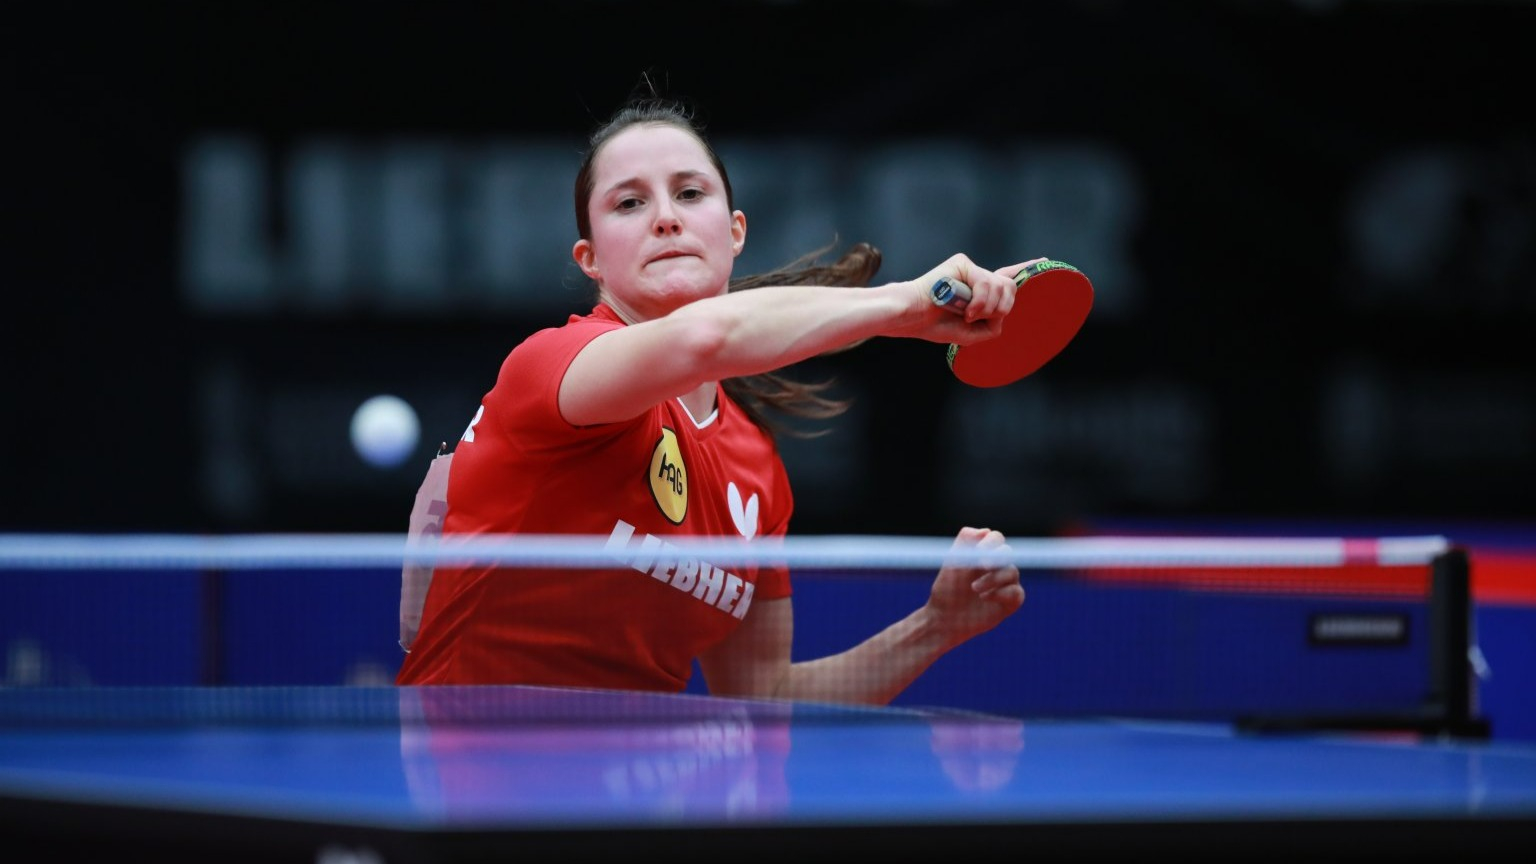 How to Watch Table Tennis at European Championships 2022 Online From Anywhere